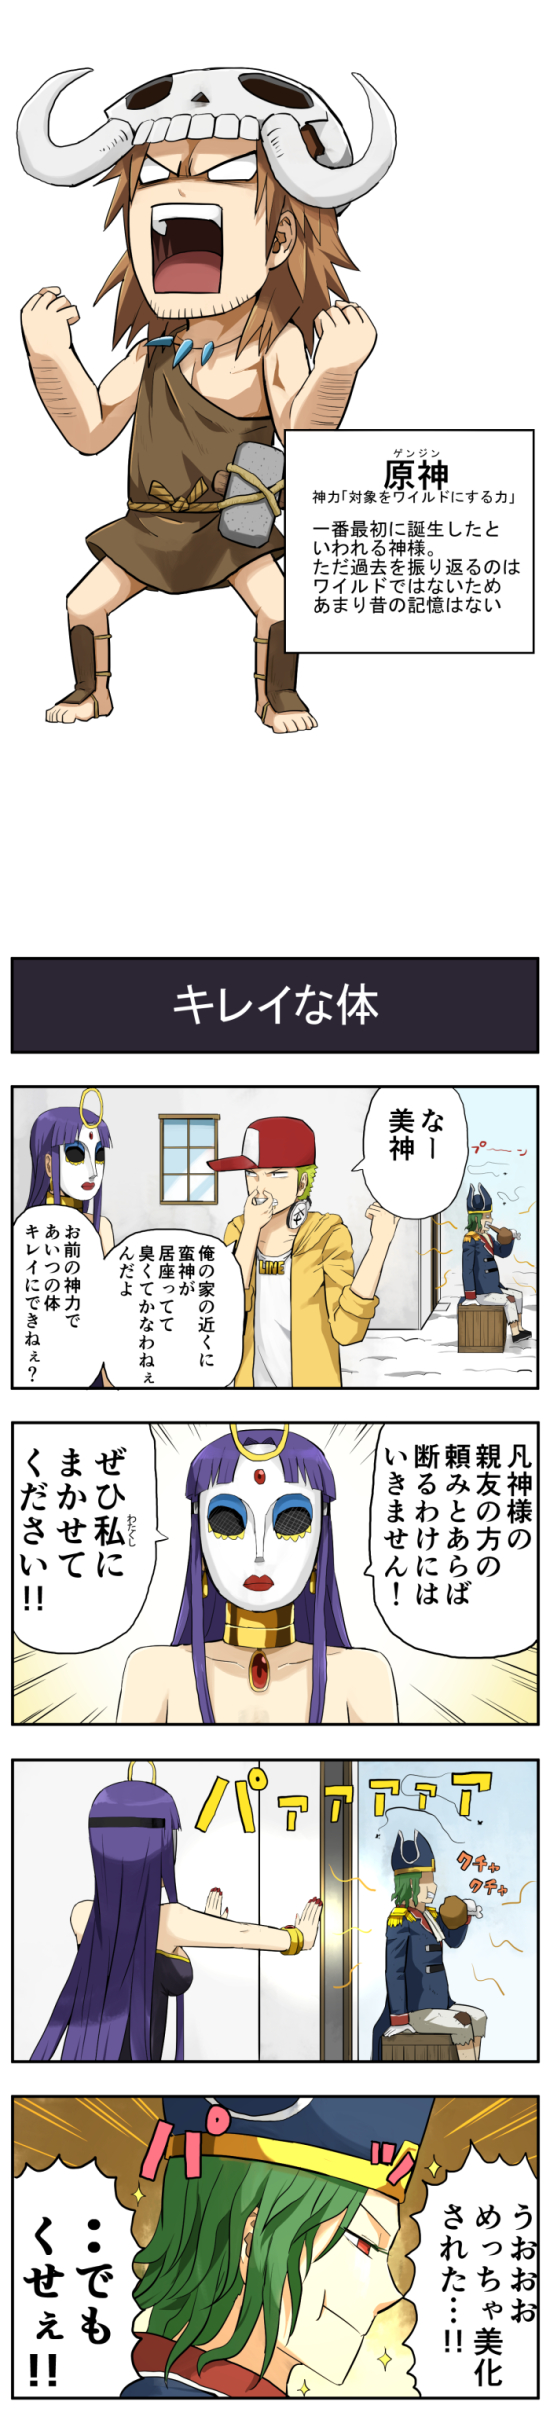 1girl 3boys 4koma absurdres banjin_(pageratta) bijin_(pageratta) boned_meat brown_hair comic eating facial_hair fly food genjin_(pageratta) green_hair halo hat headphones headphones_around_neck highres holding_nose long_image mask meat multiple_boys original pageratta purple_hair skull_helmet stubble tall_image translated window yuujin_(pageratta)